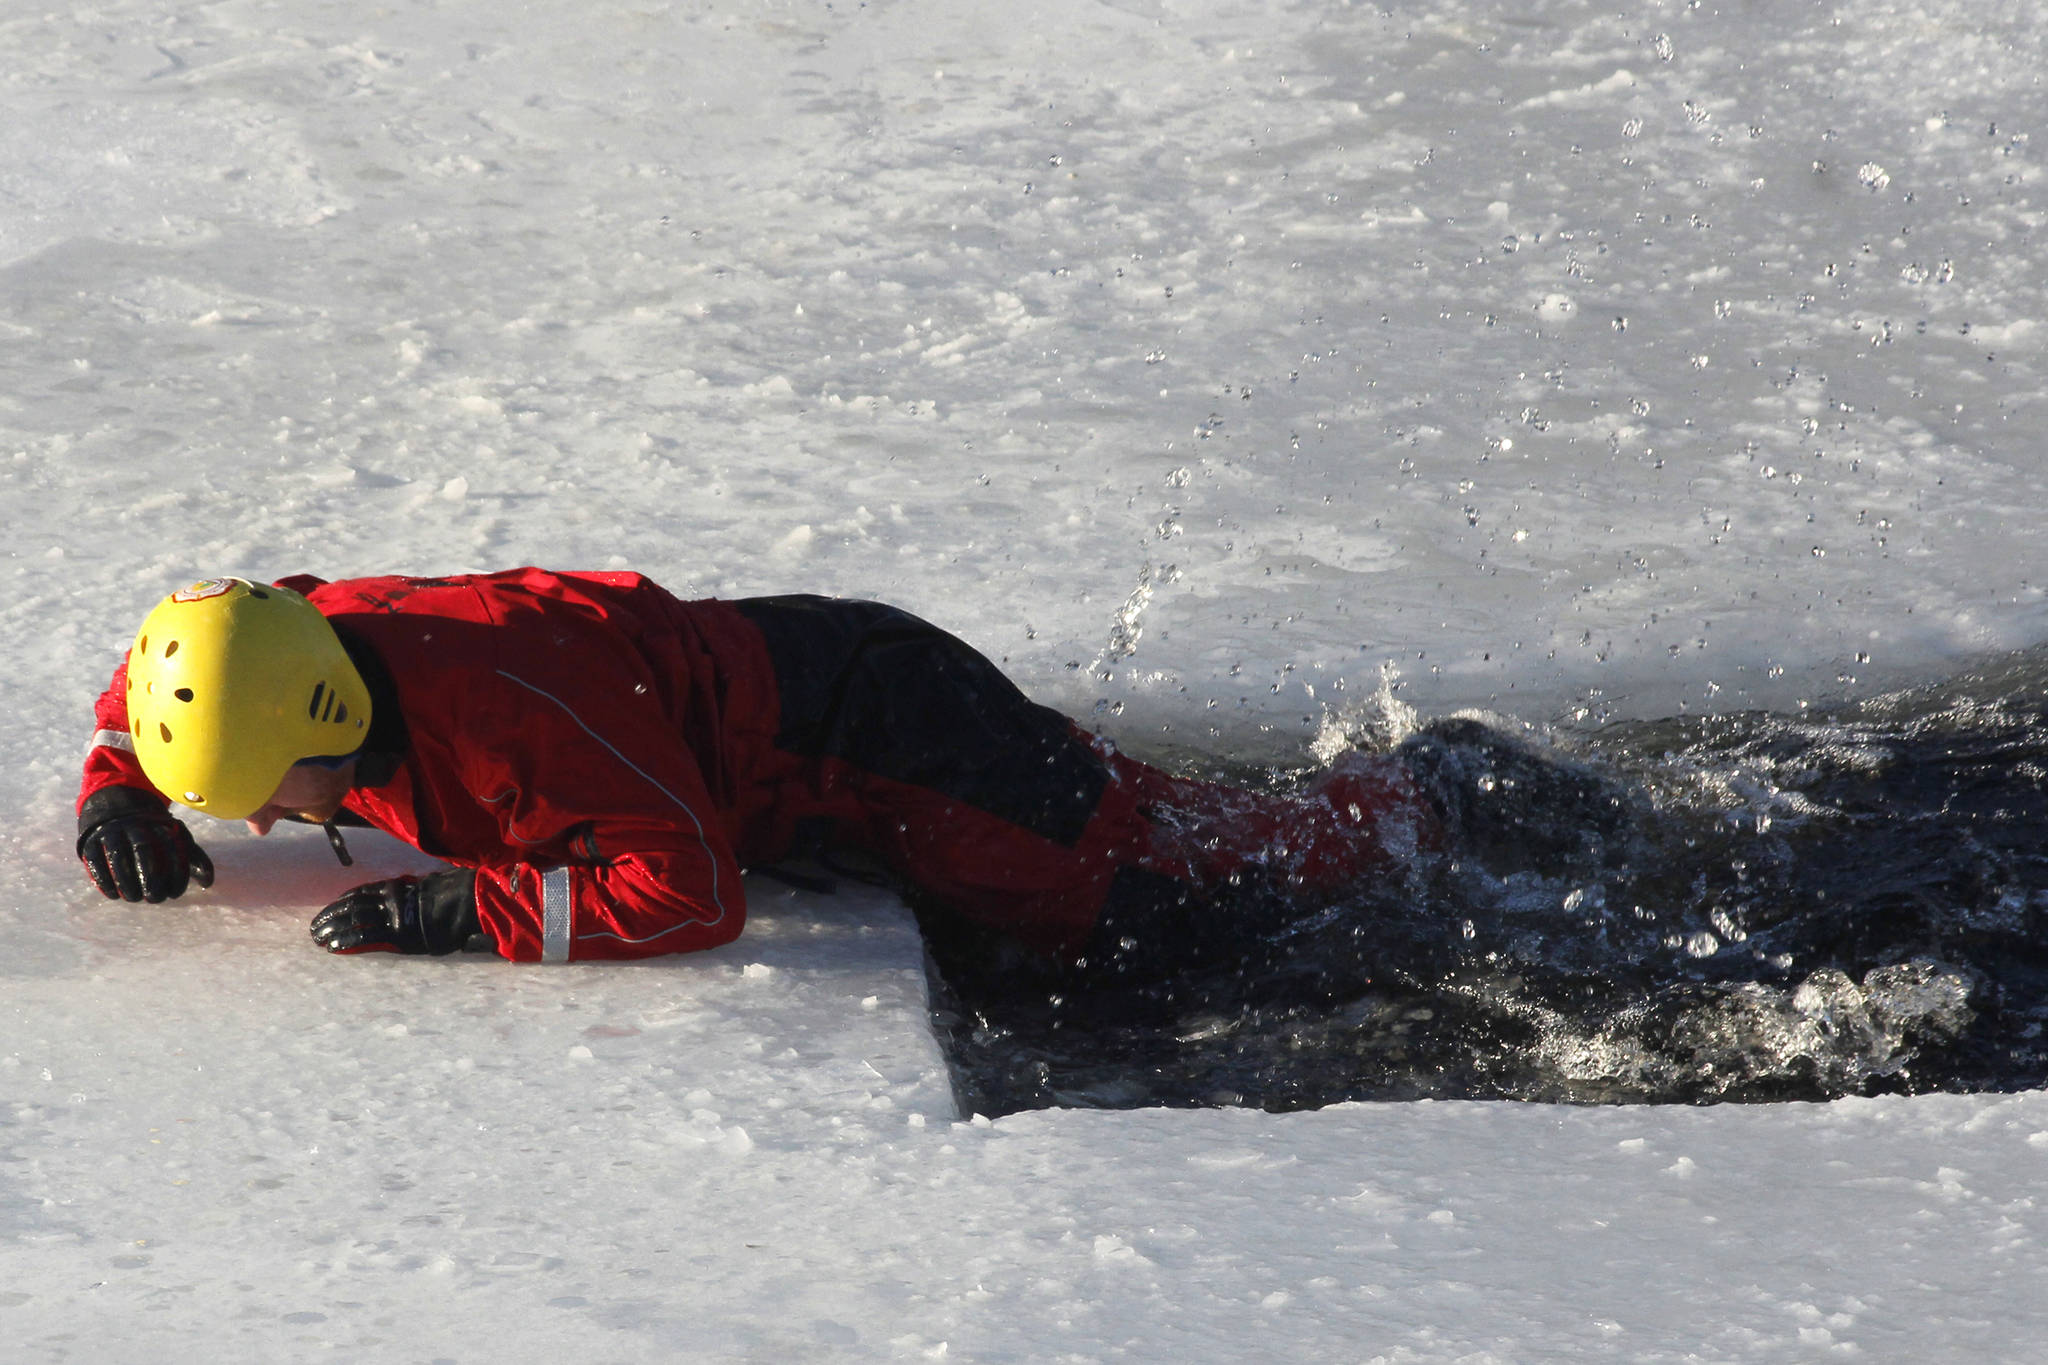 Pete Boyd, a member of Capital City Fire/Rescue’s Special Teams unit, demonstrates how to get out of the water if you’ve fallen through the ice. The demonstration, which took place Saturday at the Mendenhall Glacier Visitor Center, drew about 60 people and included a presentation with tips on how to be prepared in case you or another person falls through the ice. (Alex McCarthy | Juneau Empire)